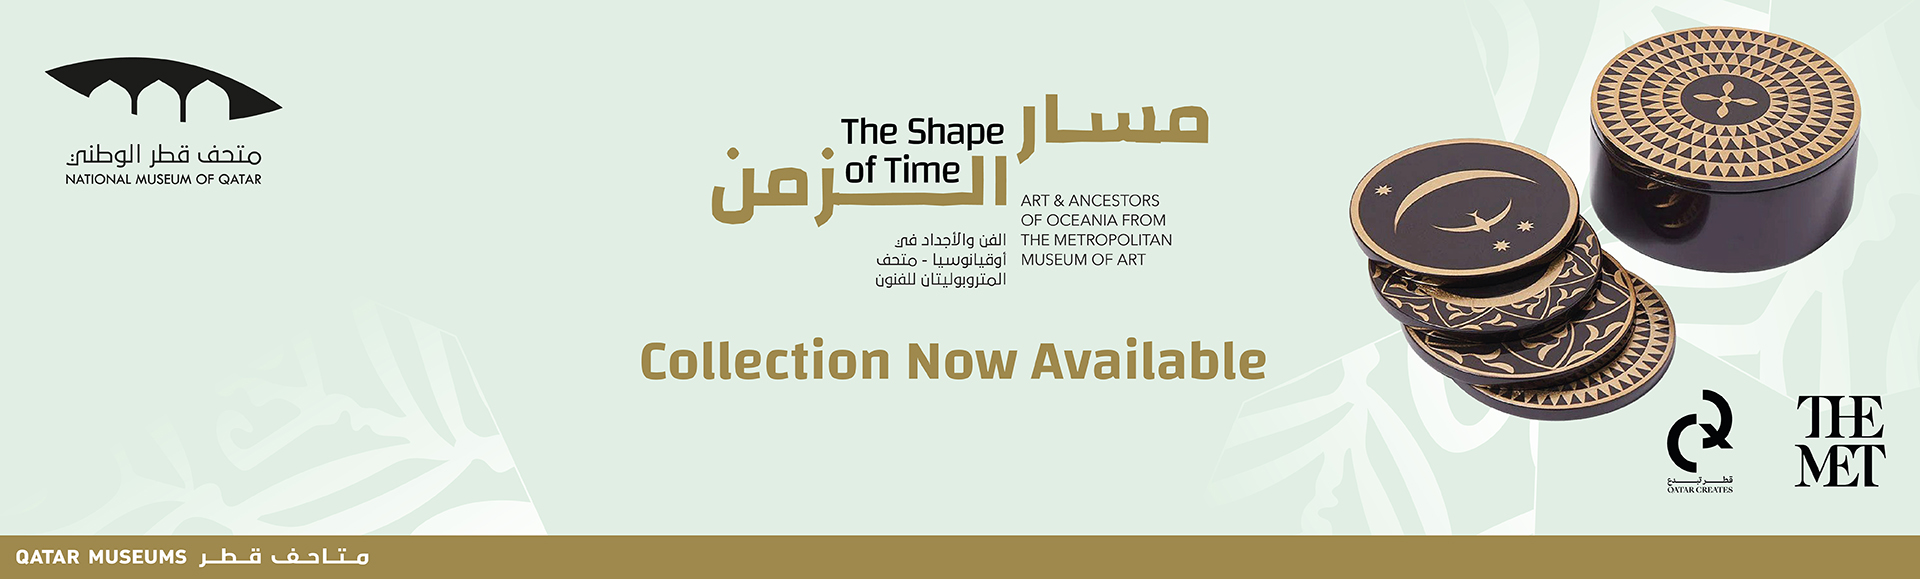 The shape of time: Art and ancestors of Oceania exhibition collection